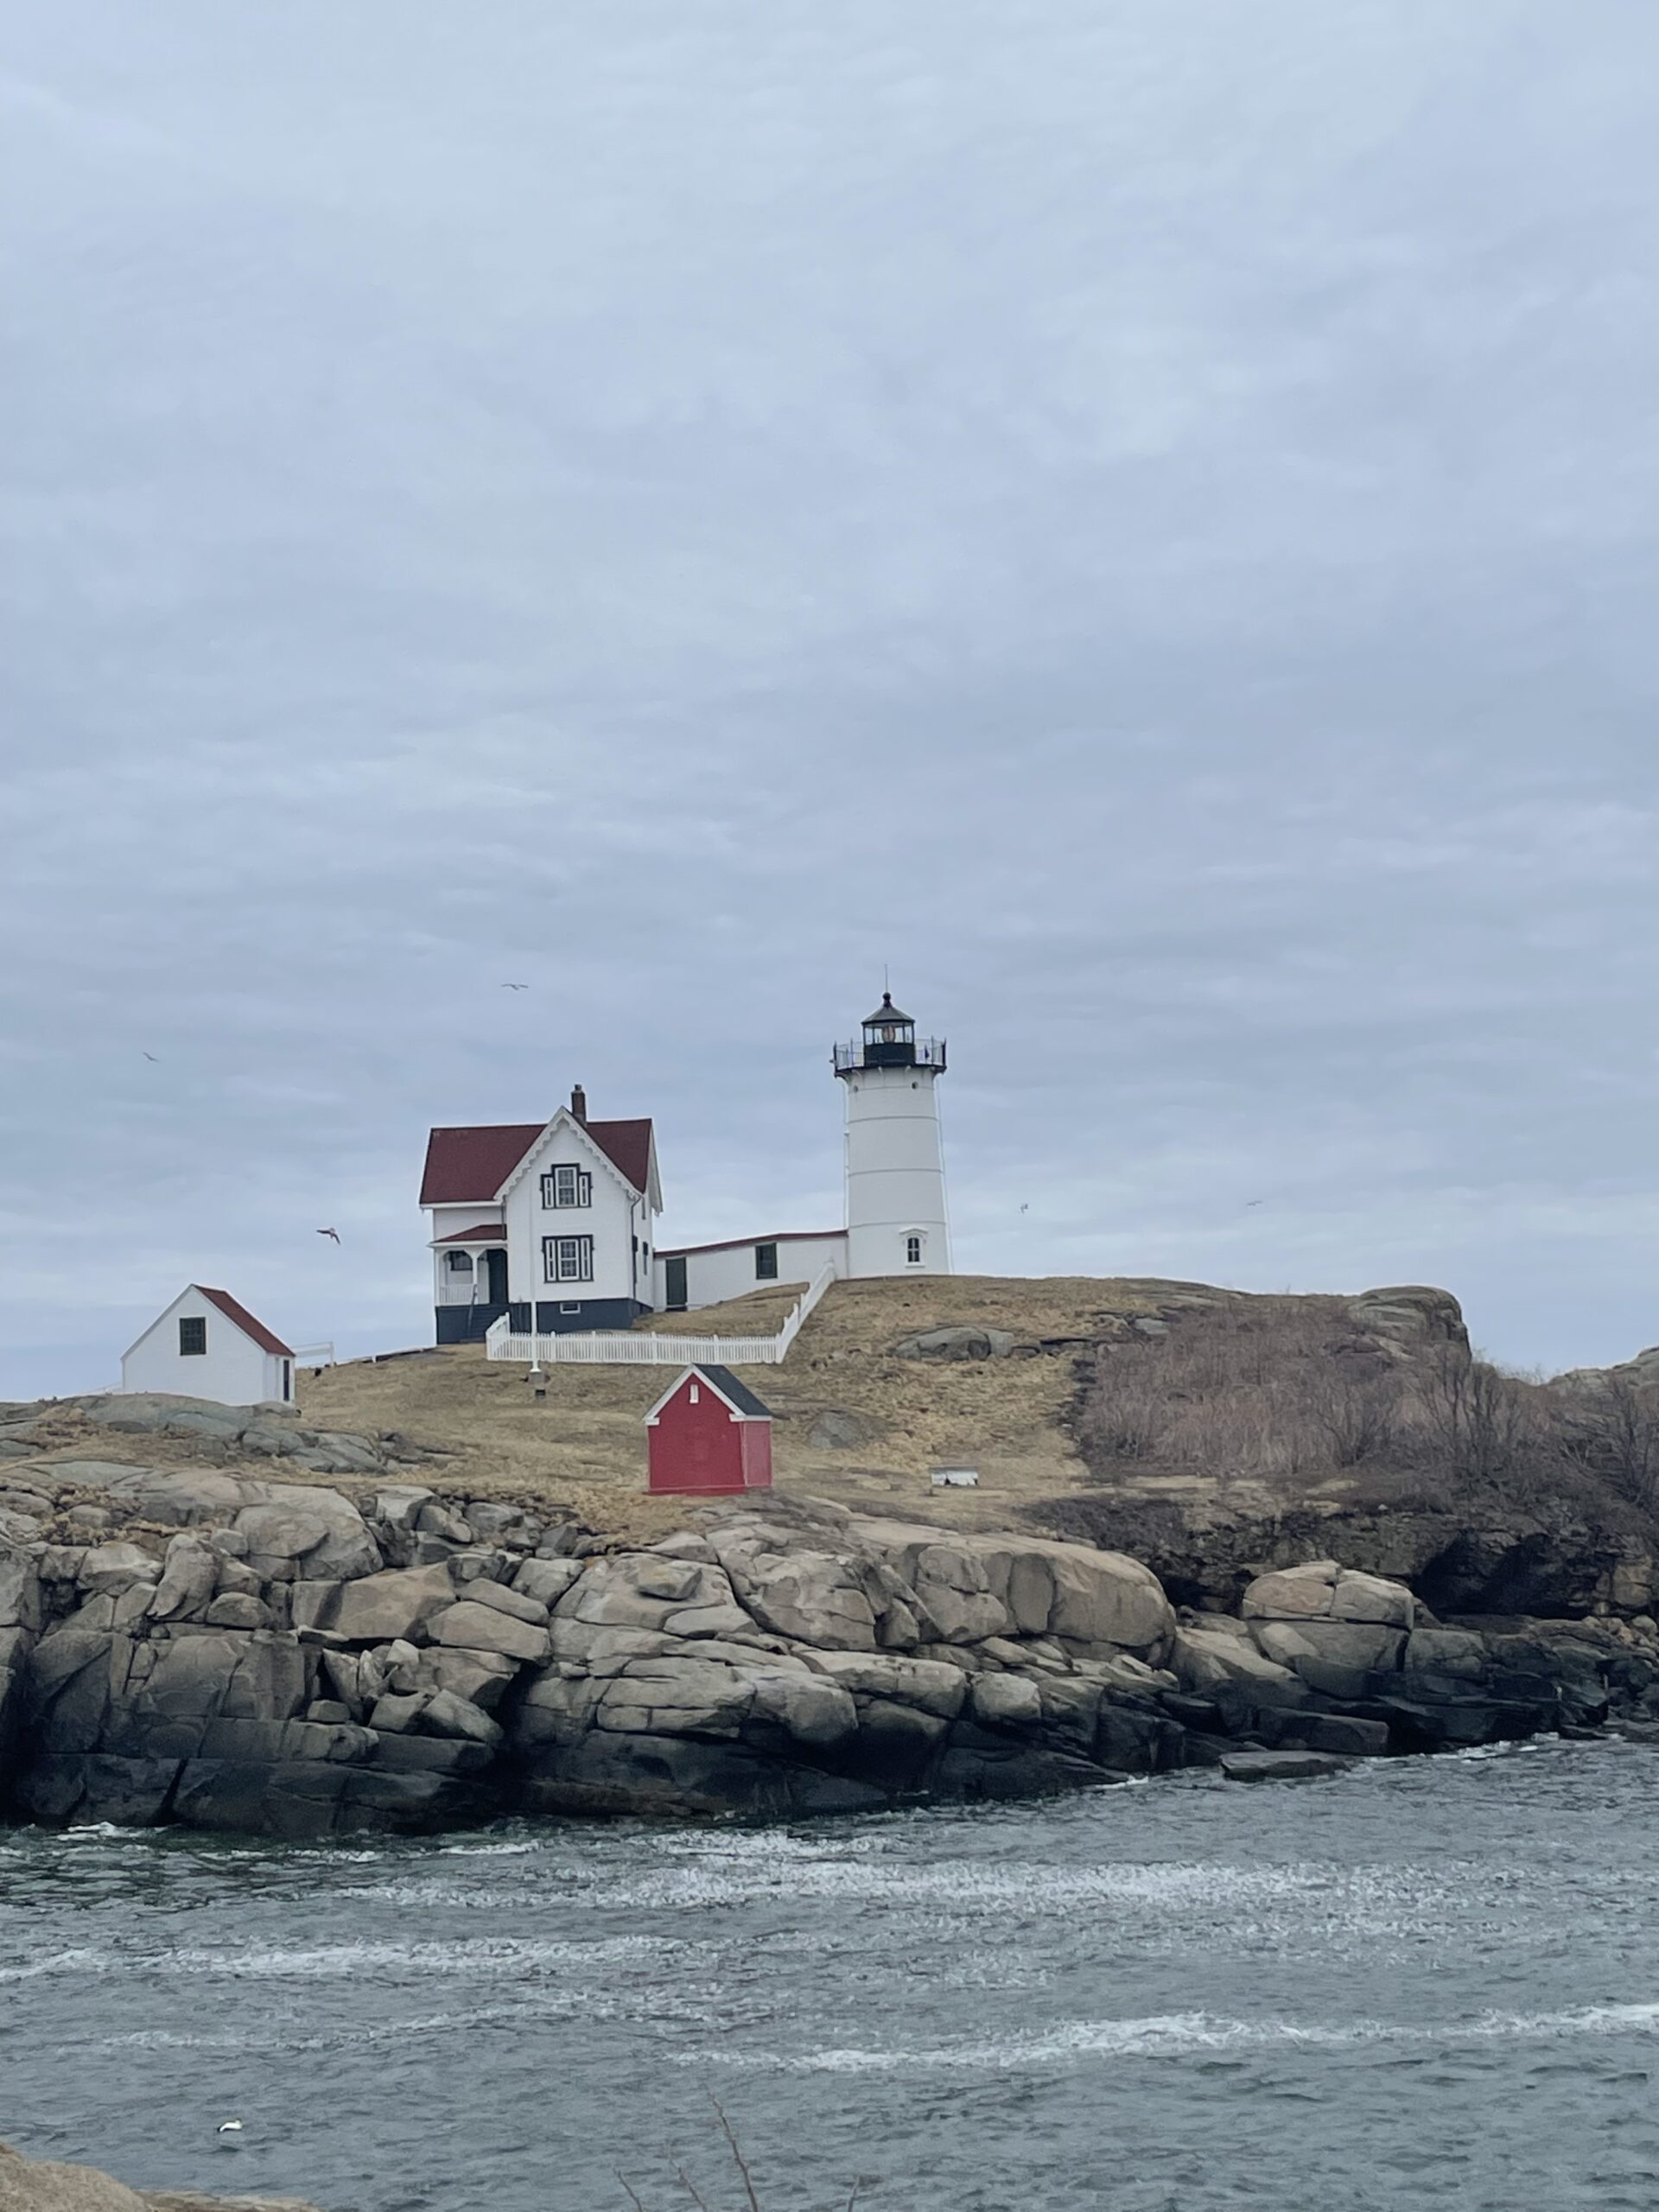 A Guide to the 20 Best things to do in York, Maine